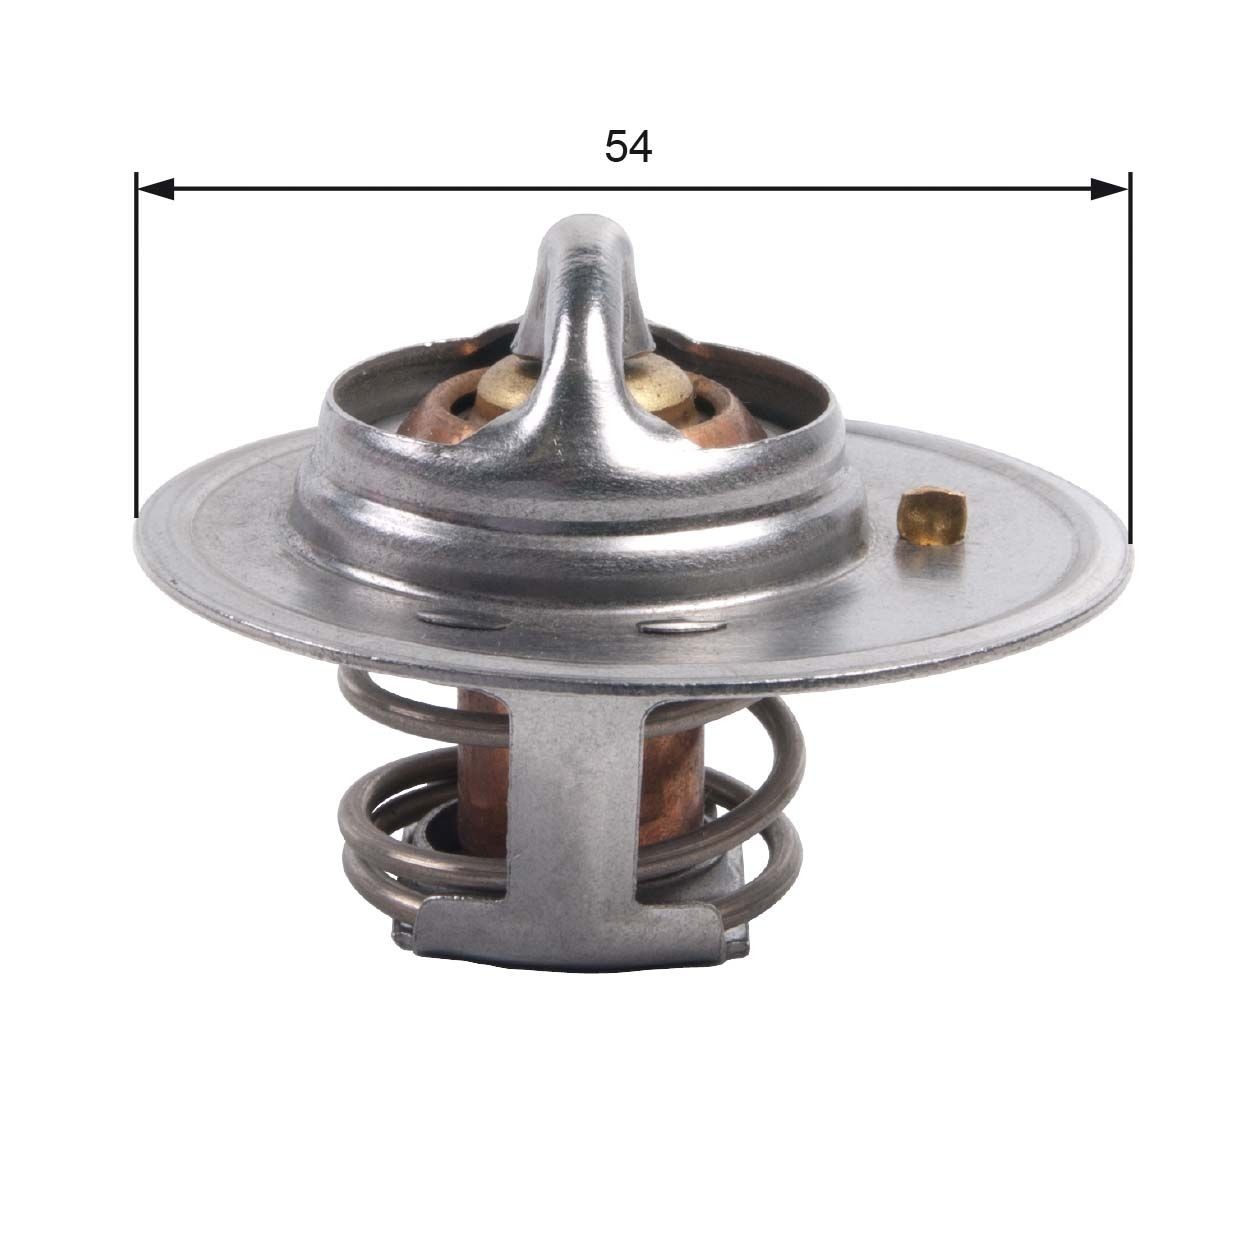 GATES TH03188G1 Engine thermostat Opening Temperature: 88°C, with gaskets/seals, without housing